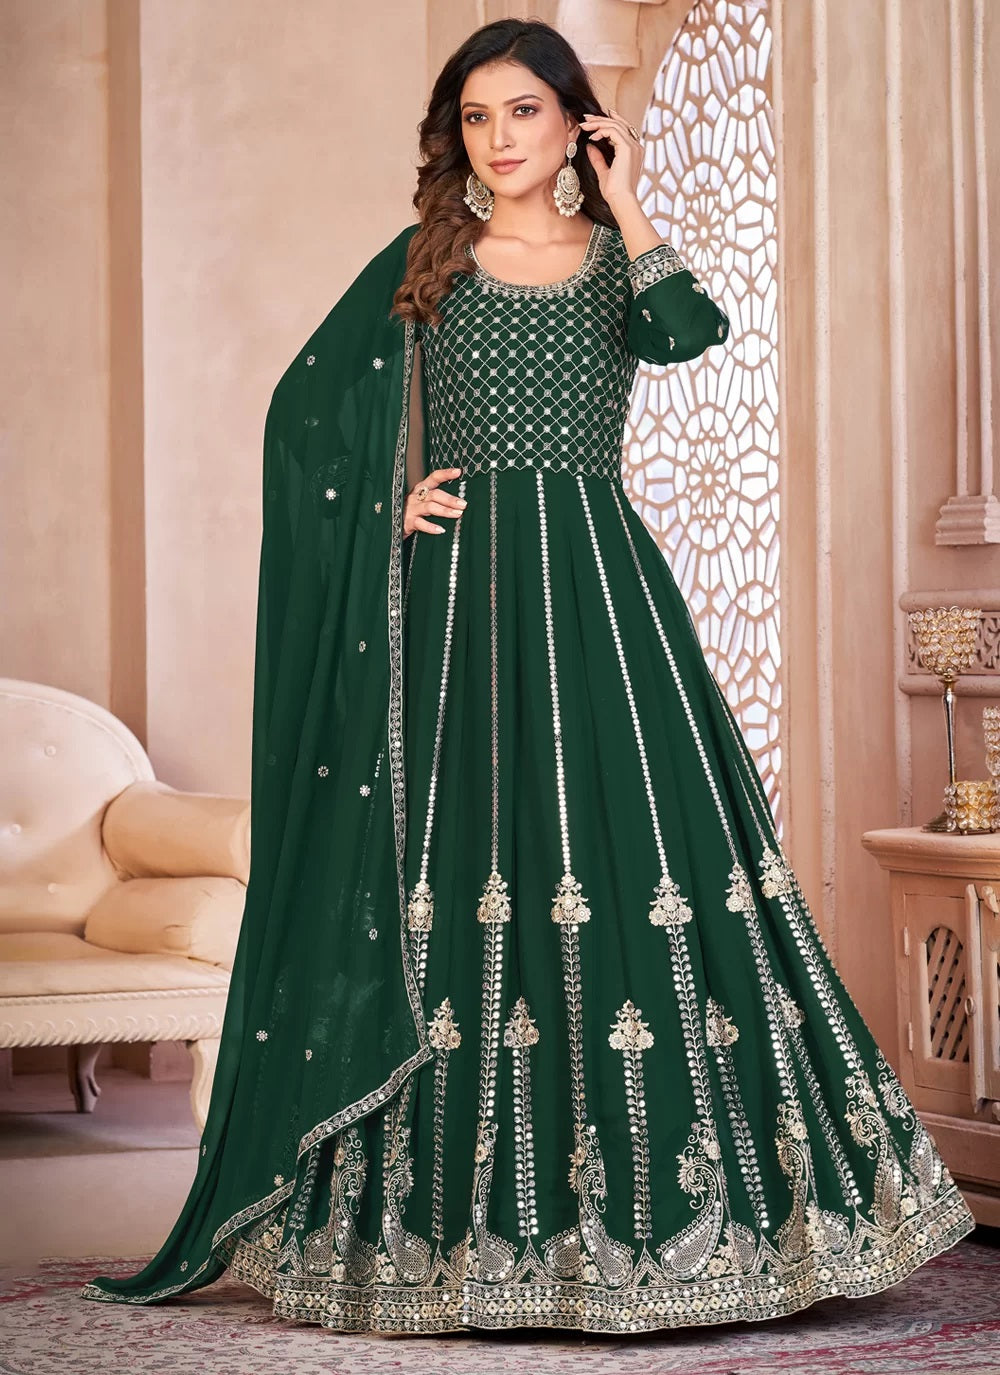 Faux Georgette Reception Salwar Kameez in Green with Embroidery work